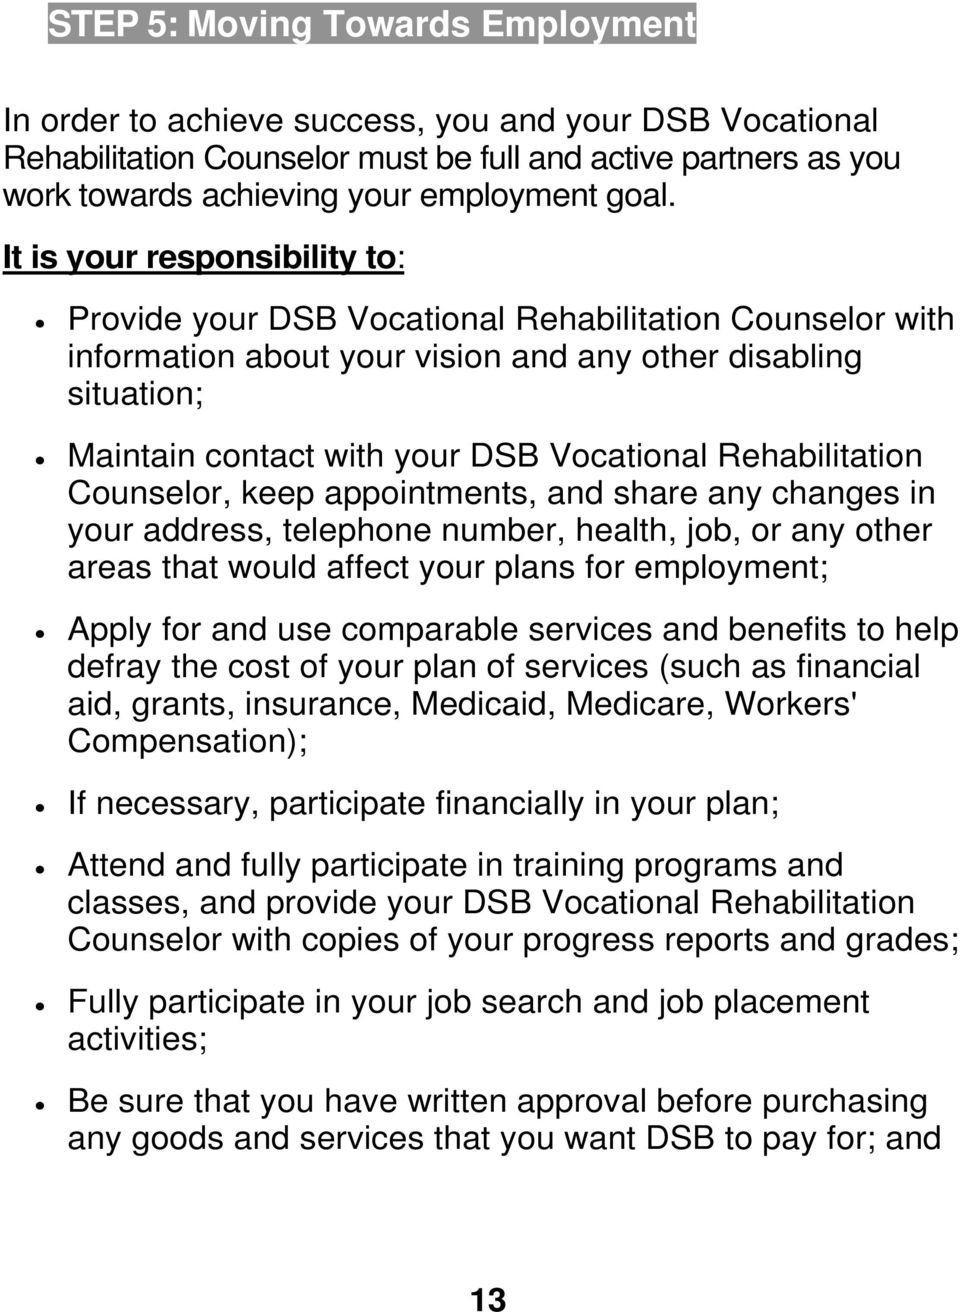 Rehabilitation Counselor, keep appointments, and share any changes in your address, telephone number, health, job, or any other areas that would affect your plans for employment; Apply for and use